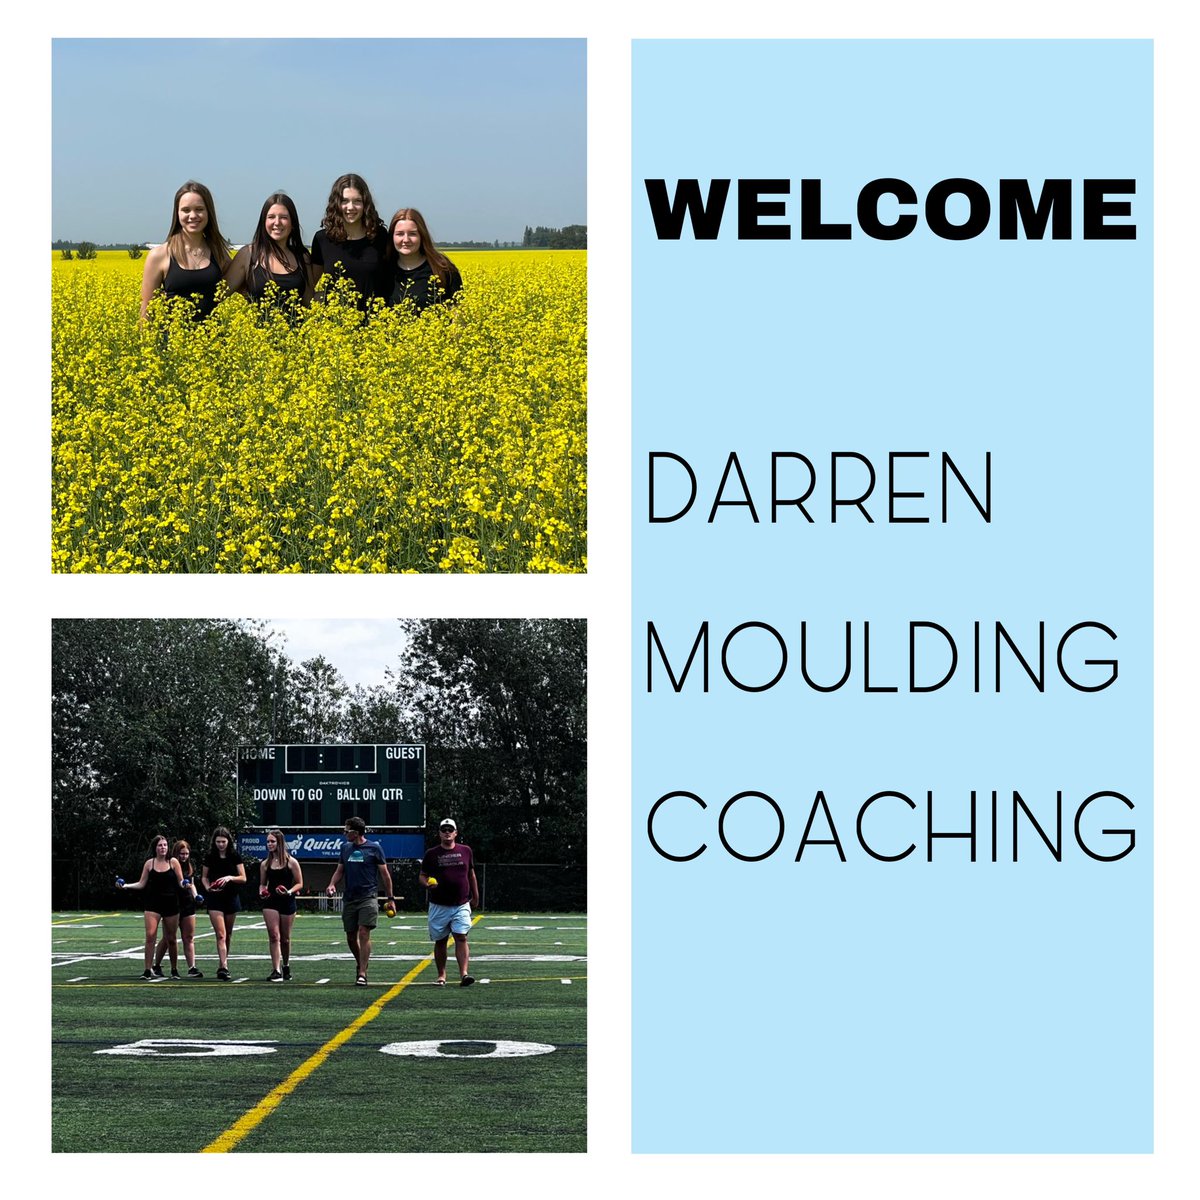 So glad to have the support of Darren Moulding Coaching! We are very excited to have you on board, as we look toward a great season!

Darren’s incredible playing resumé, as well as his international coaching experience is a tremendous asset to our team! 

Welcome and thank you!